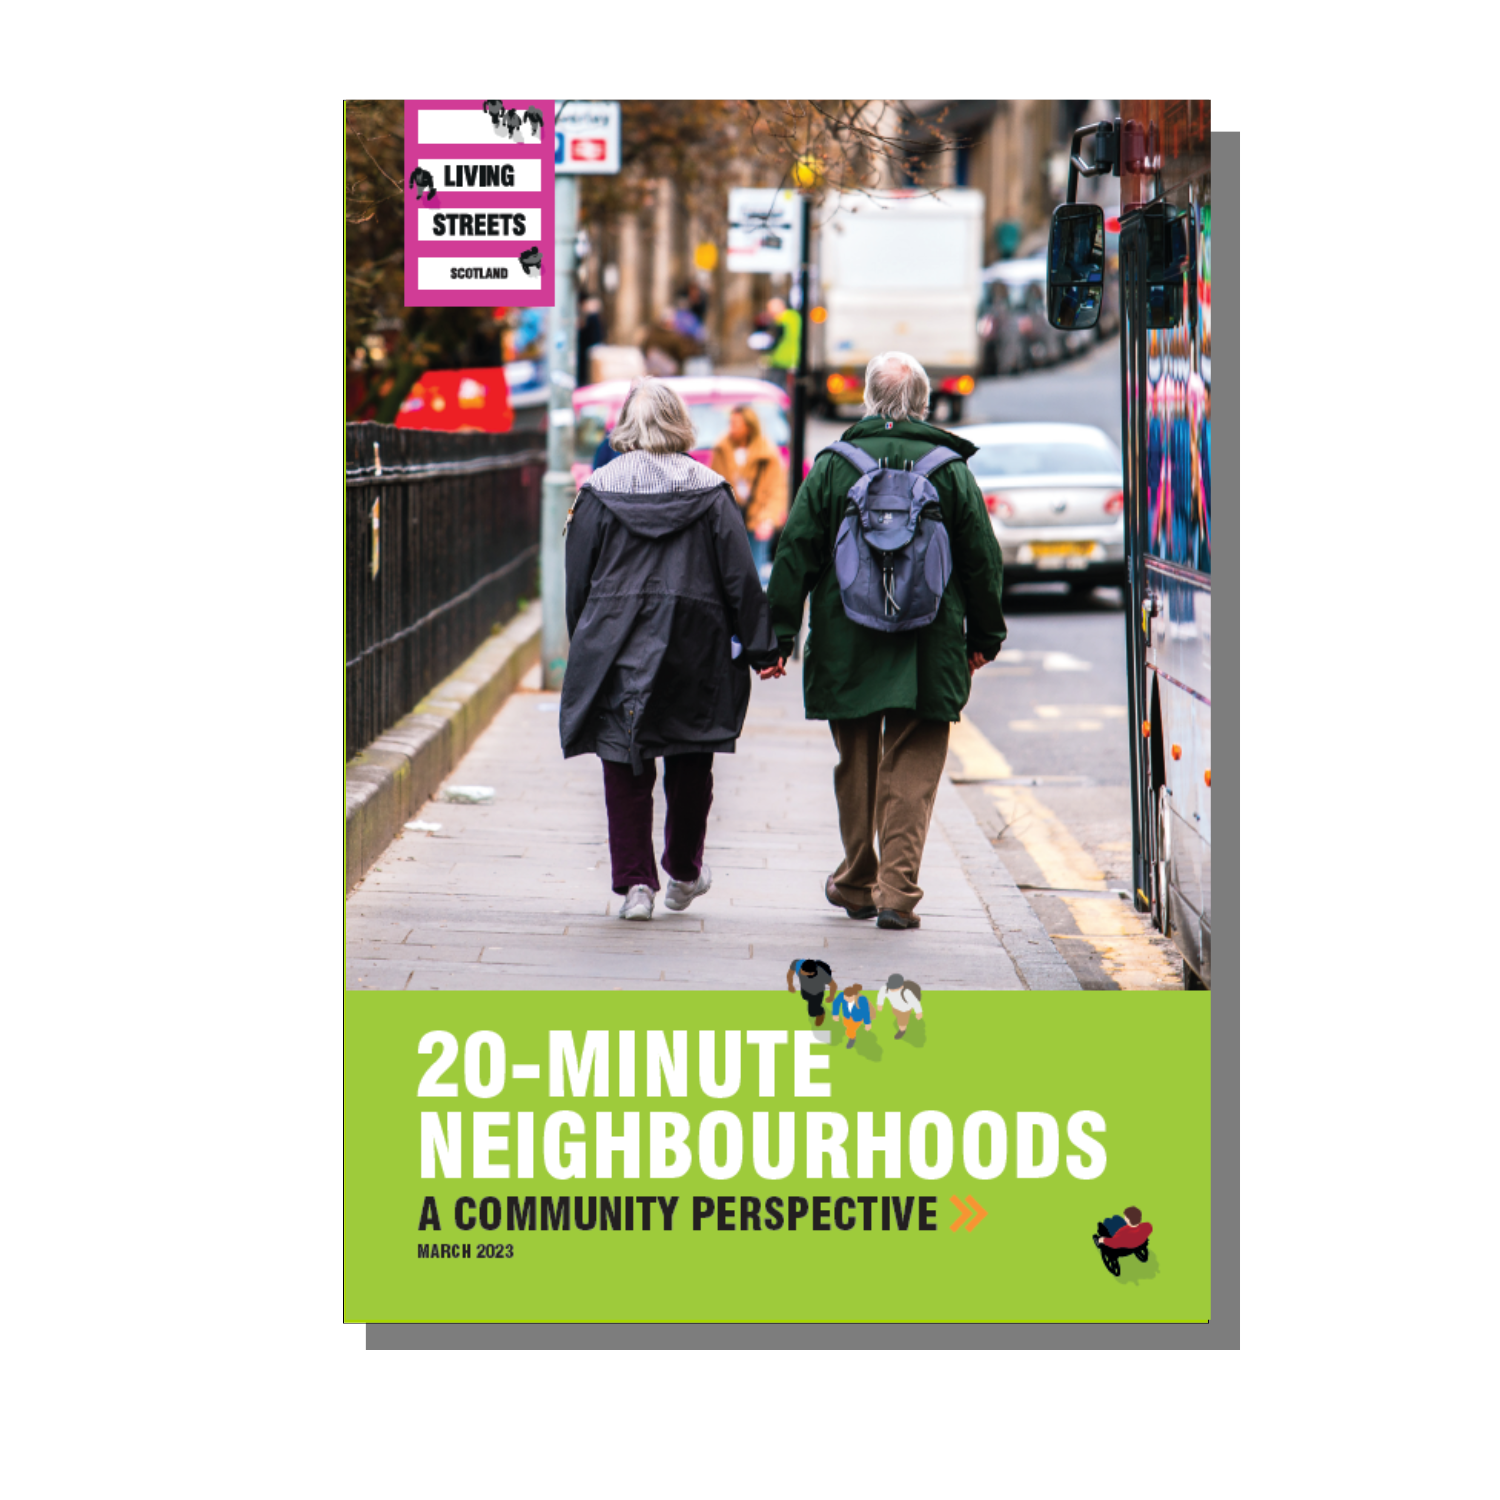 Report cover - image of an older couple holding hands walking along a pavement